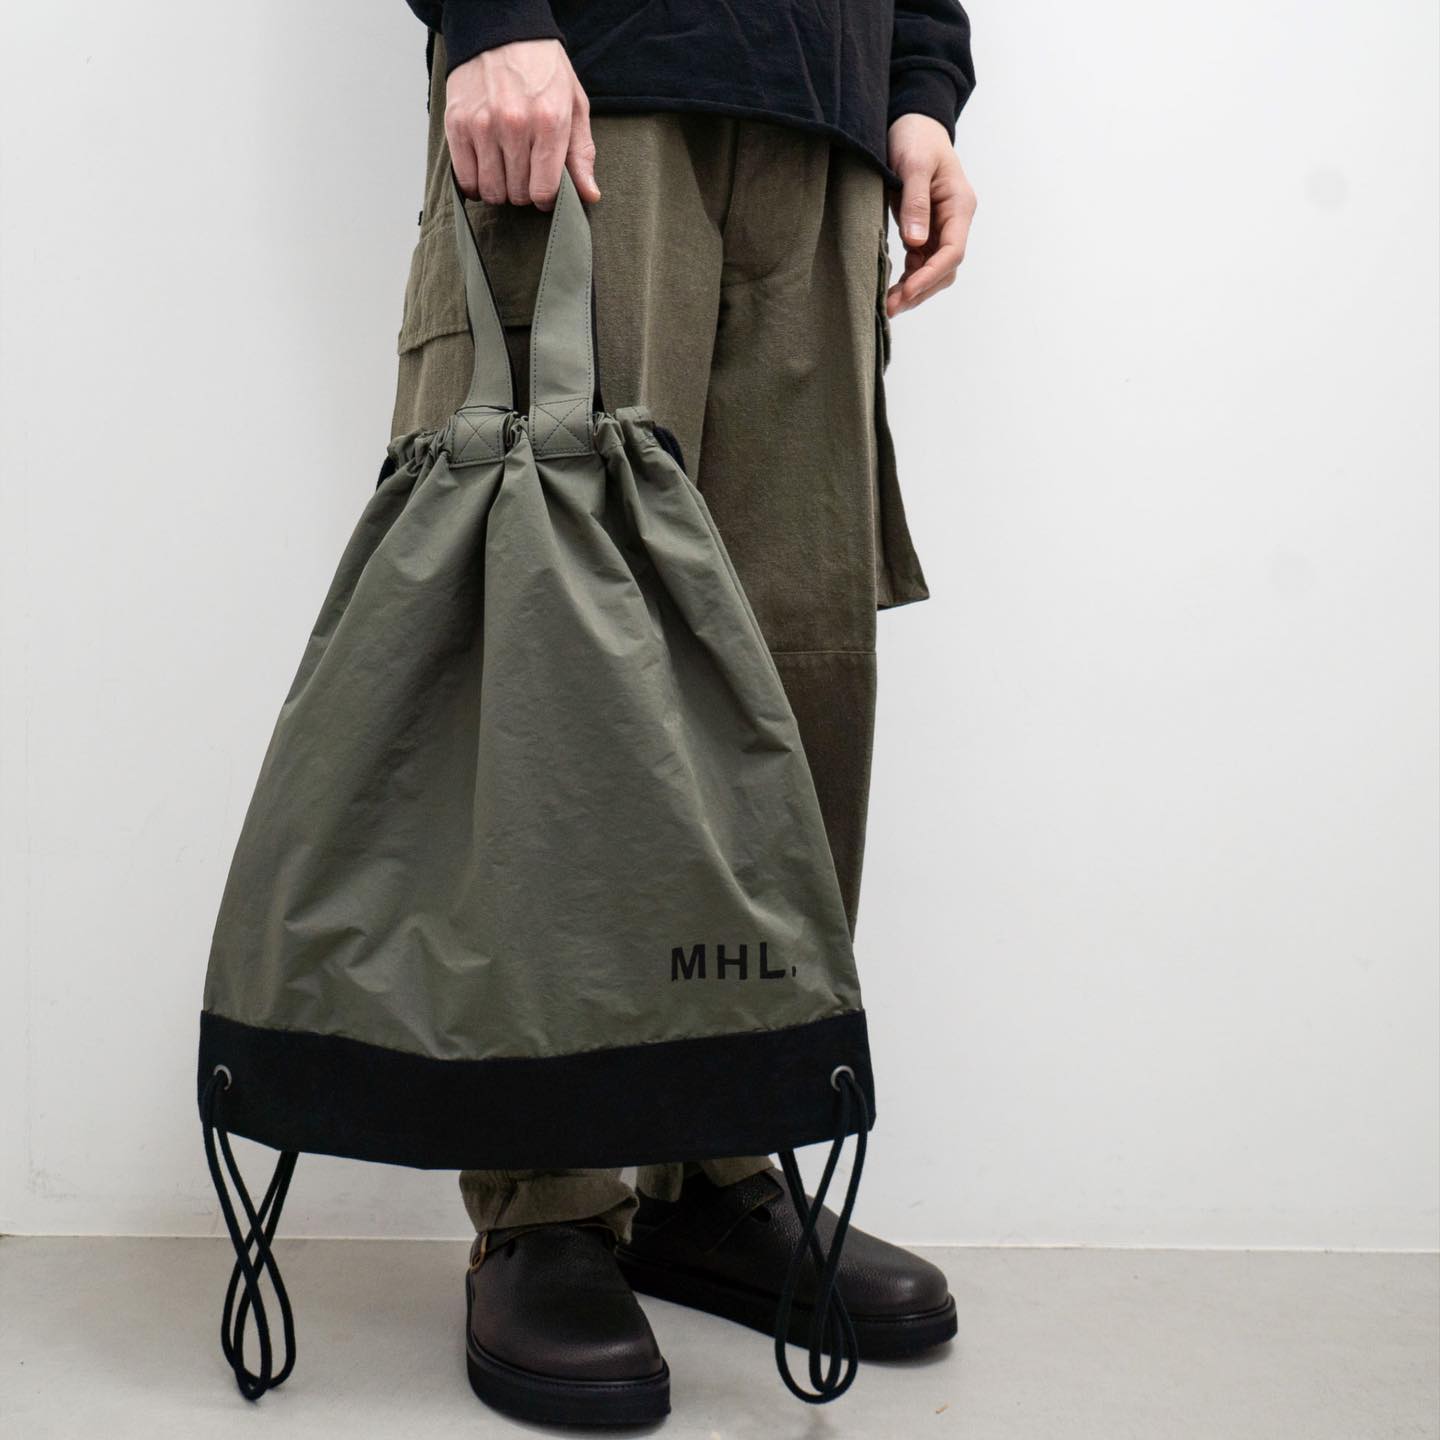 MHL. WASHED POLYESTER NYLON ポリエステルとナイロンを複合した糸を ...